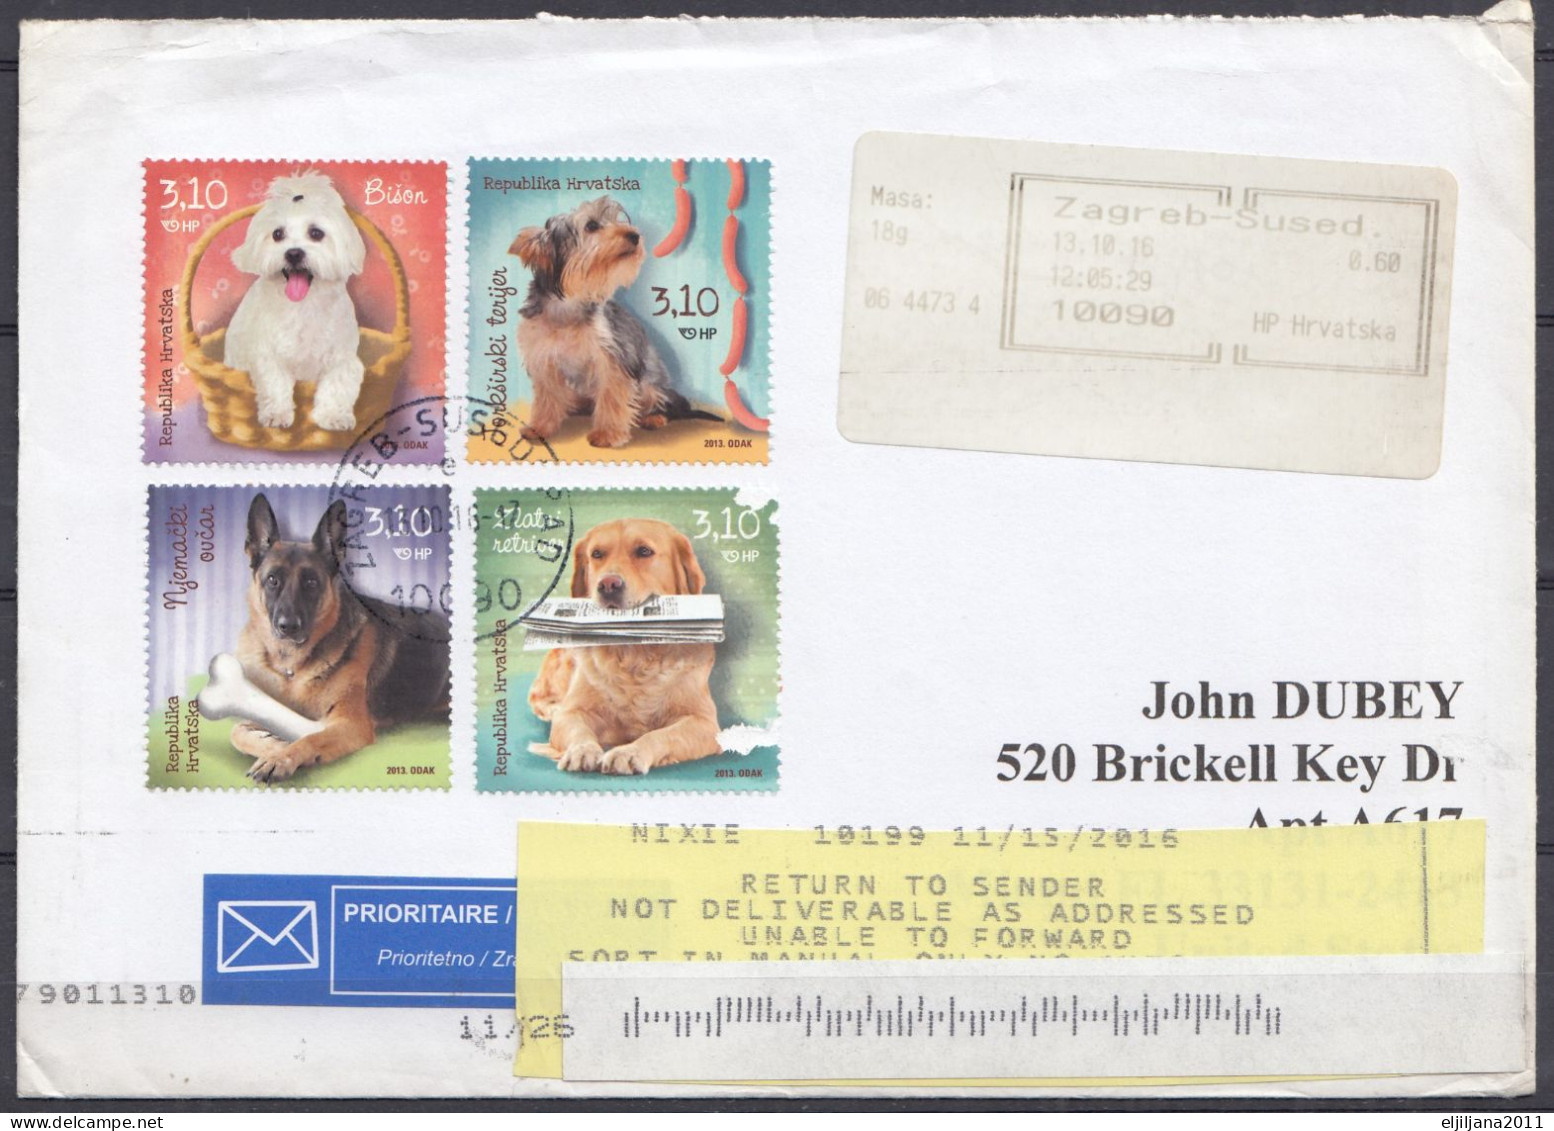 ⁕ CROATIA 2016 Hrvatska ⁕ AIRMAIL Sent To USA, Registered Shipment Returned To The Sender's Address ⁕ With Stamps Pets - Croatia